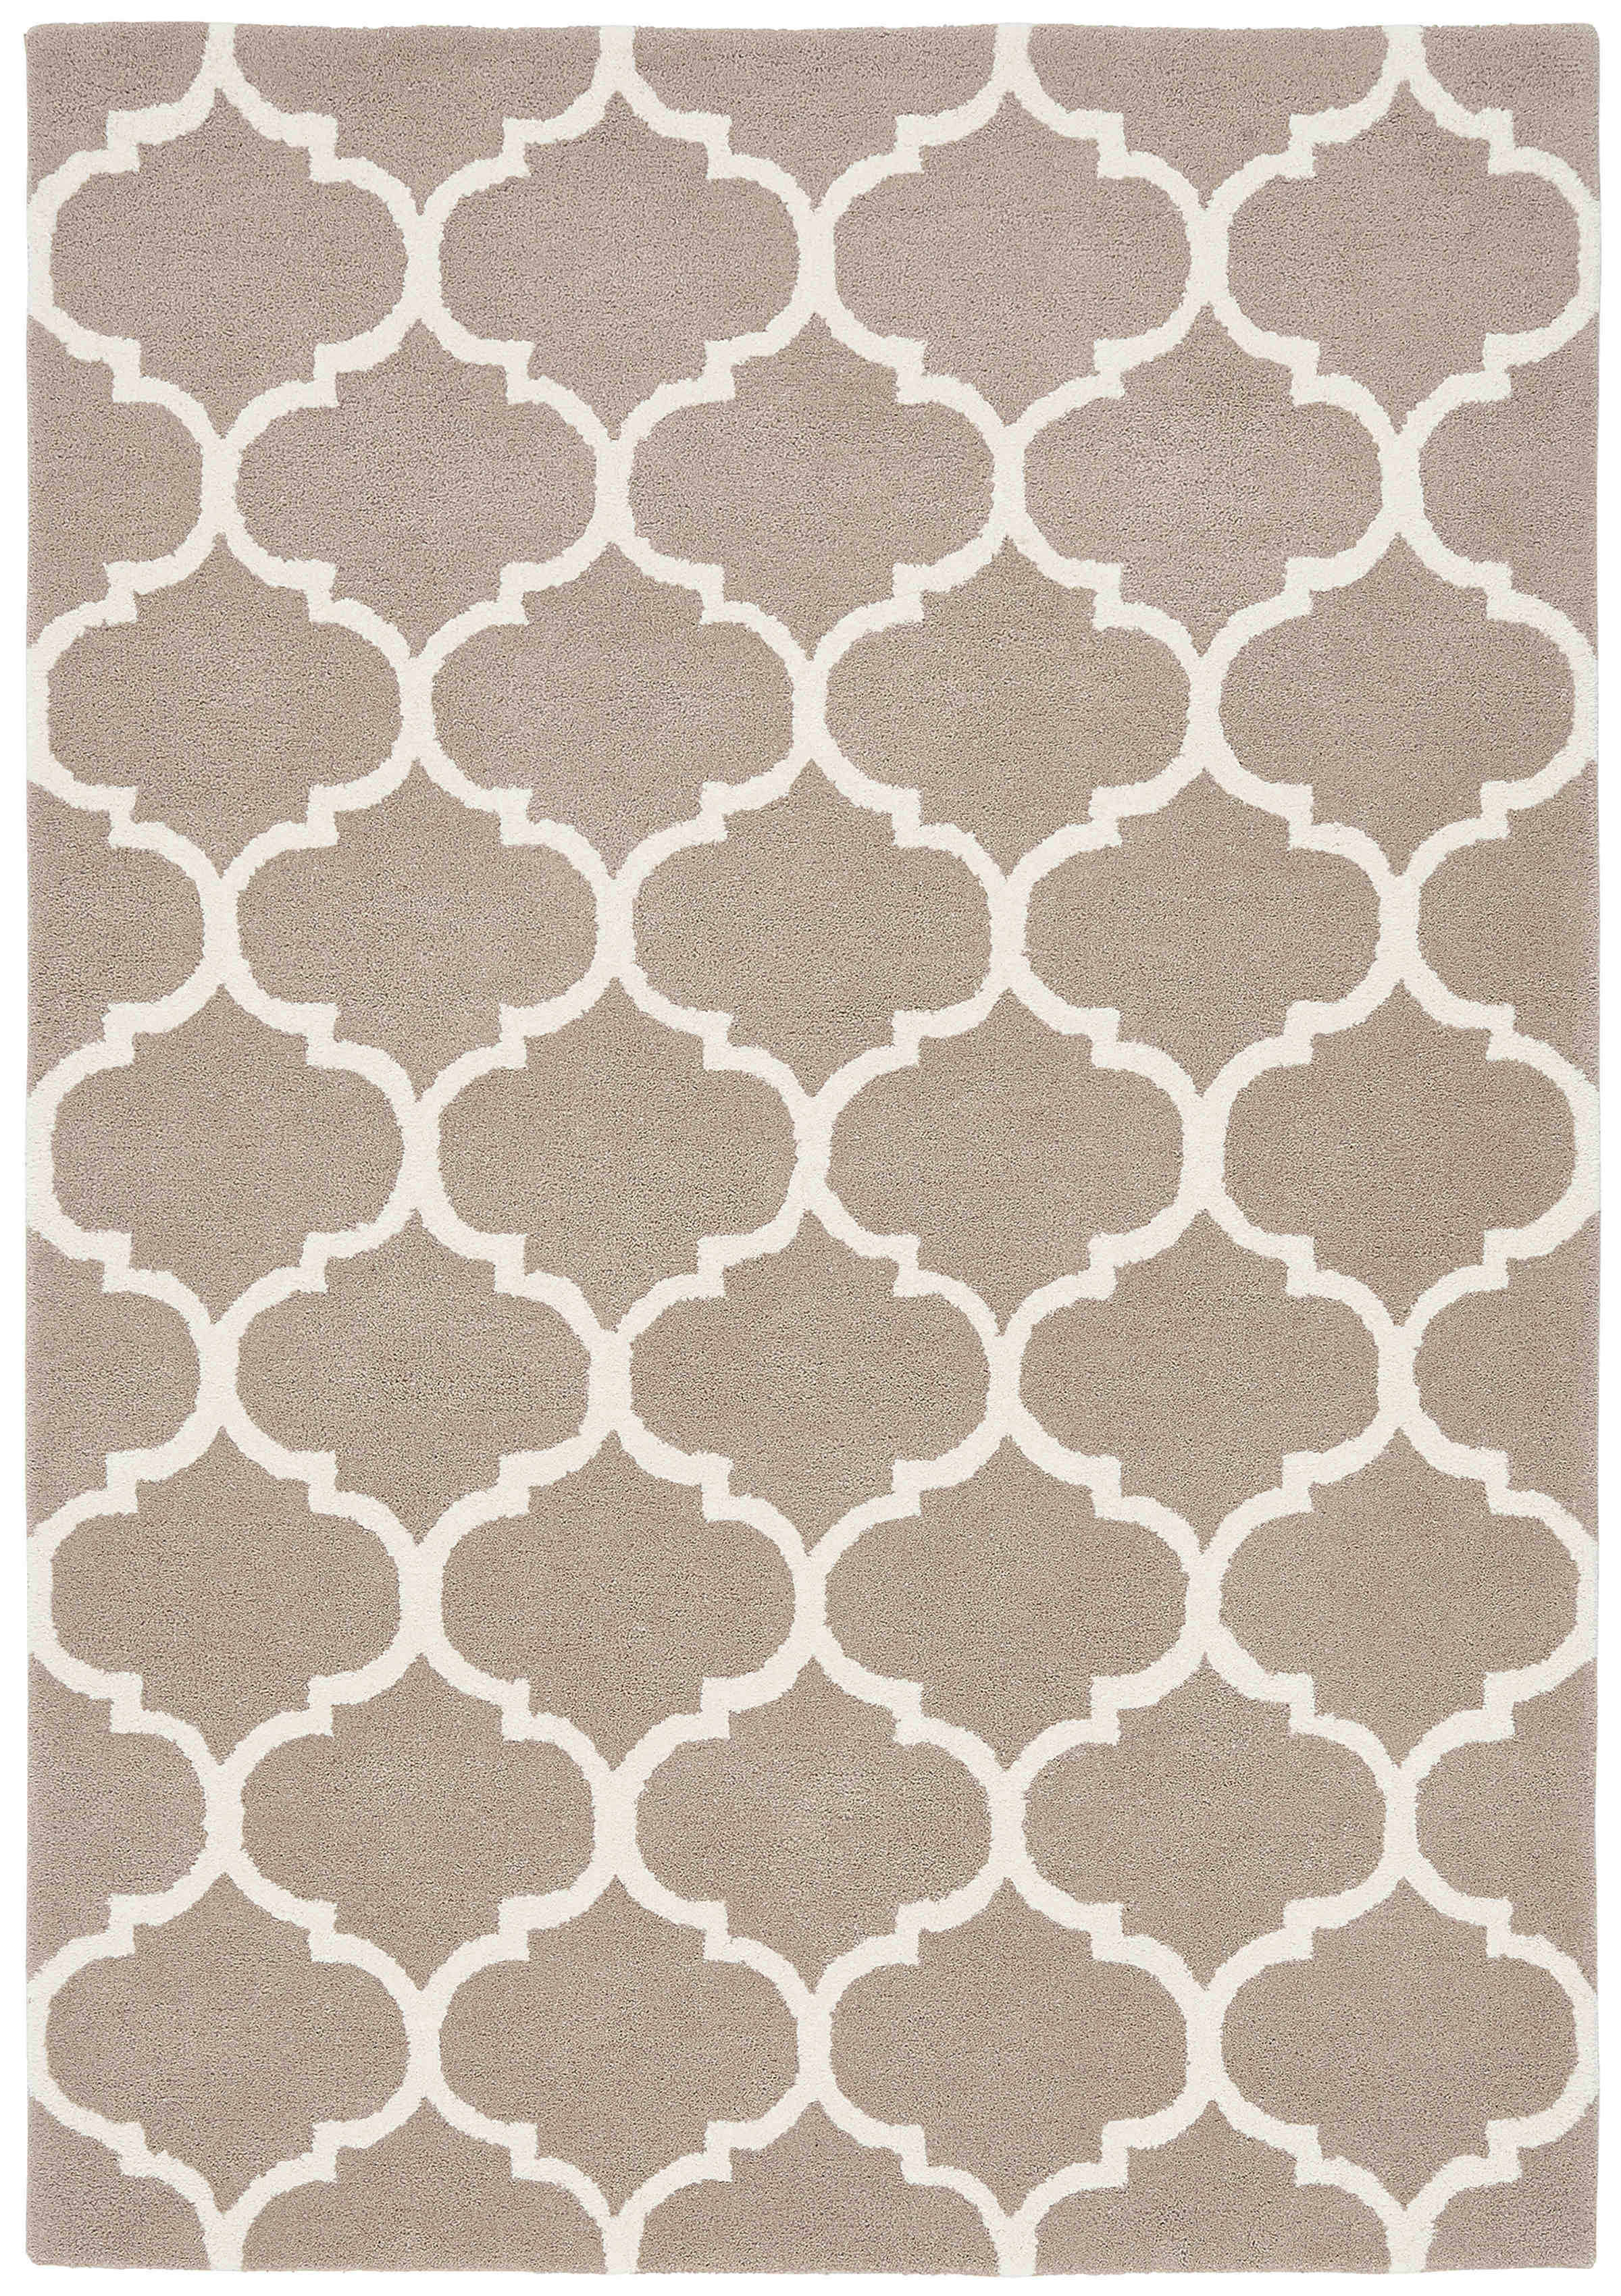 beige geometric rug with an ogee pattern